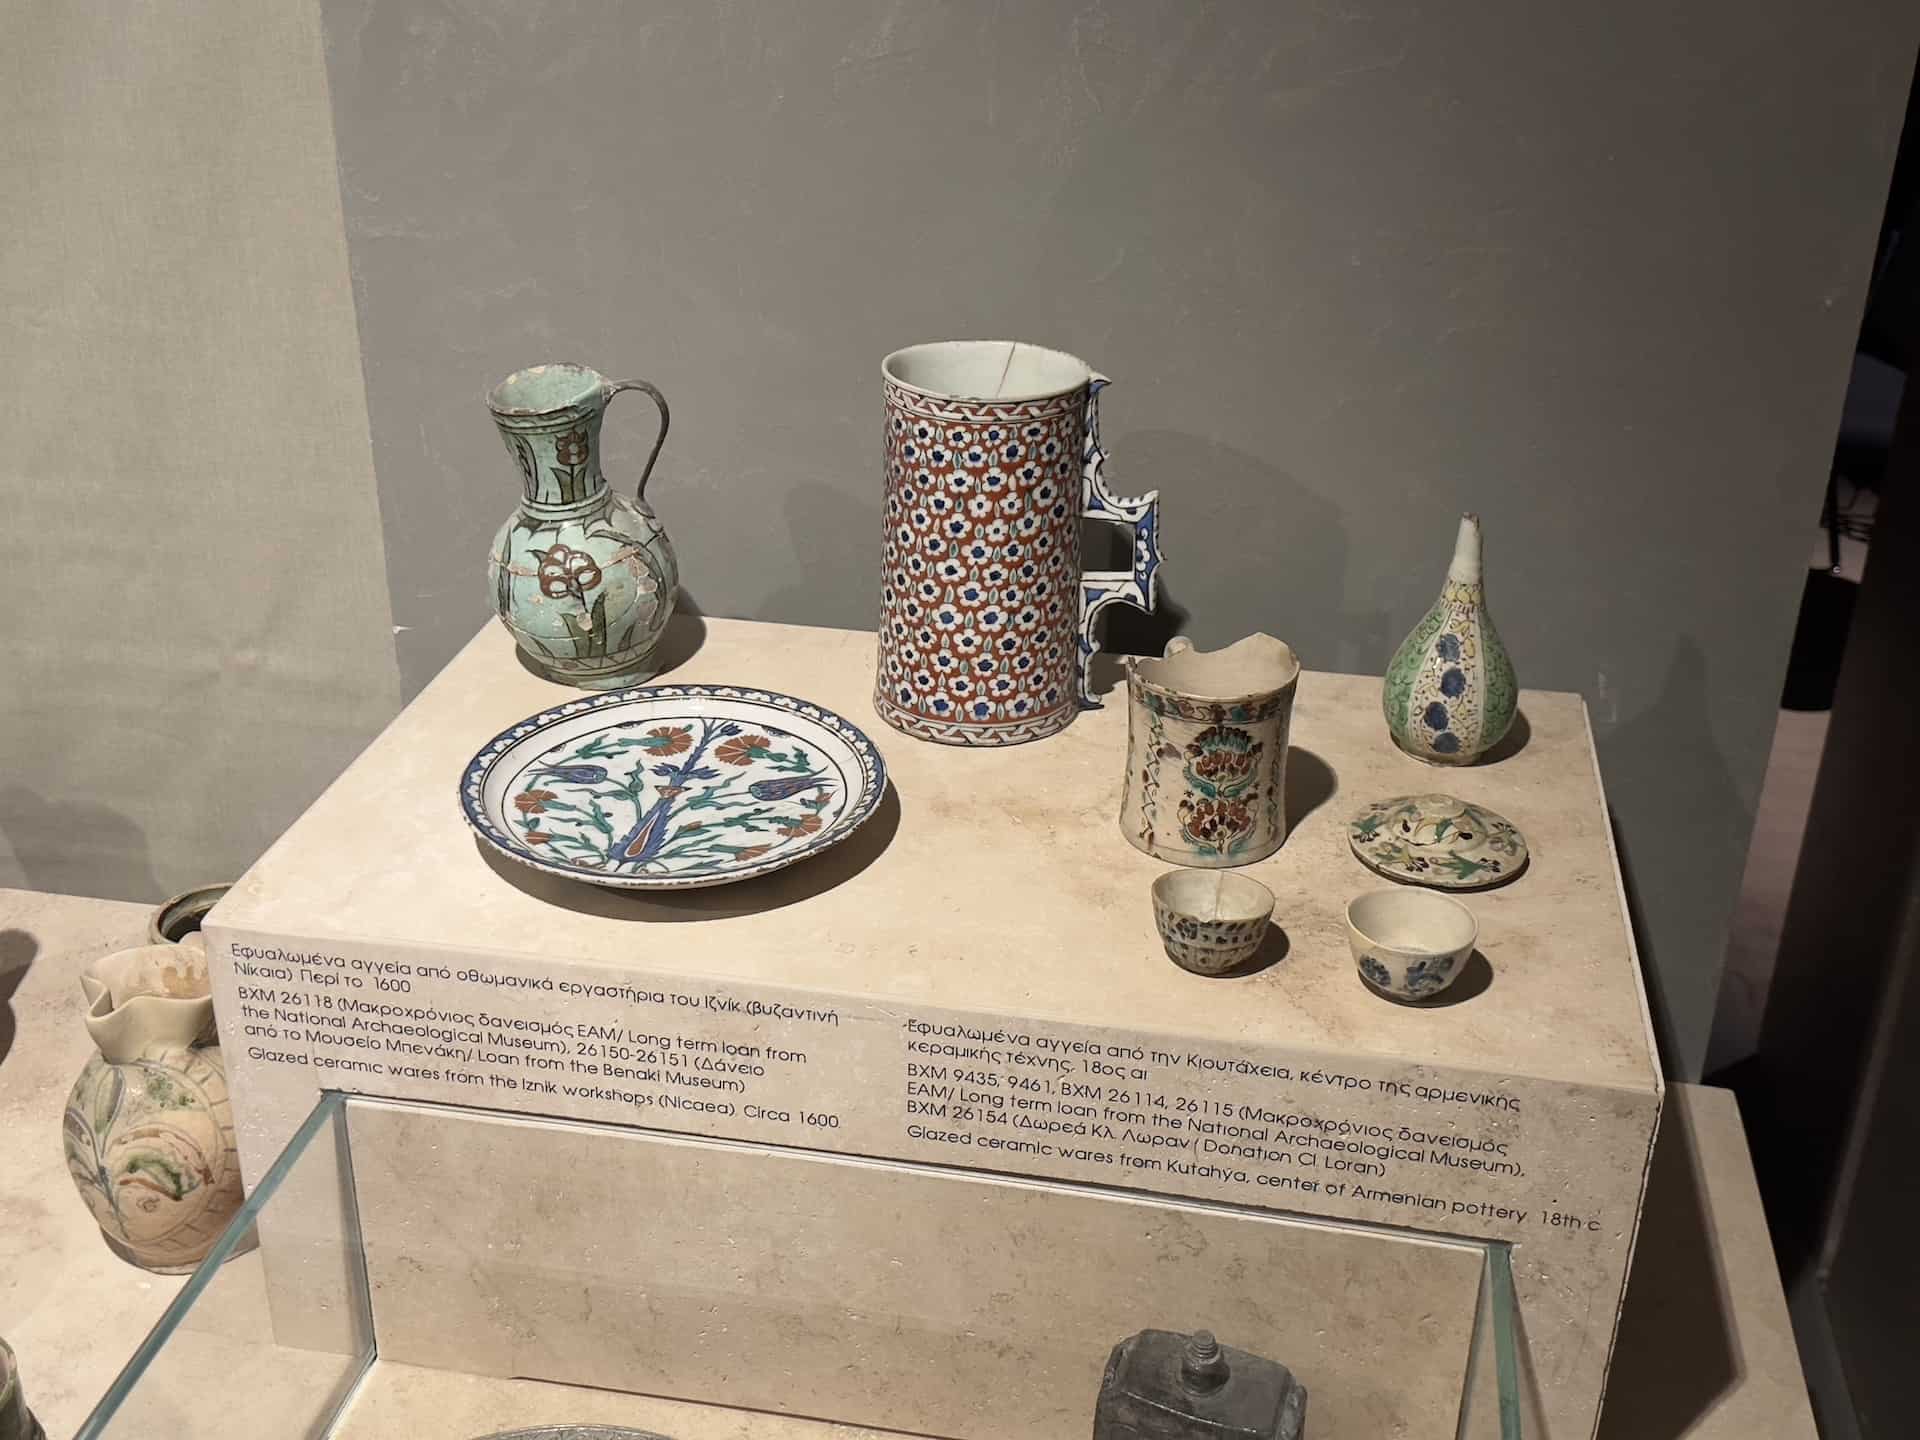 Glazed ceramic wares from Iznik workshops, c. 1600 (left); Glazed ceramic wares from Kütahya, center of Armenian pottery, 18th century (right) at the Byzantine Museum in Athens, Greece